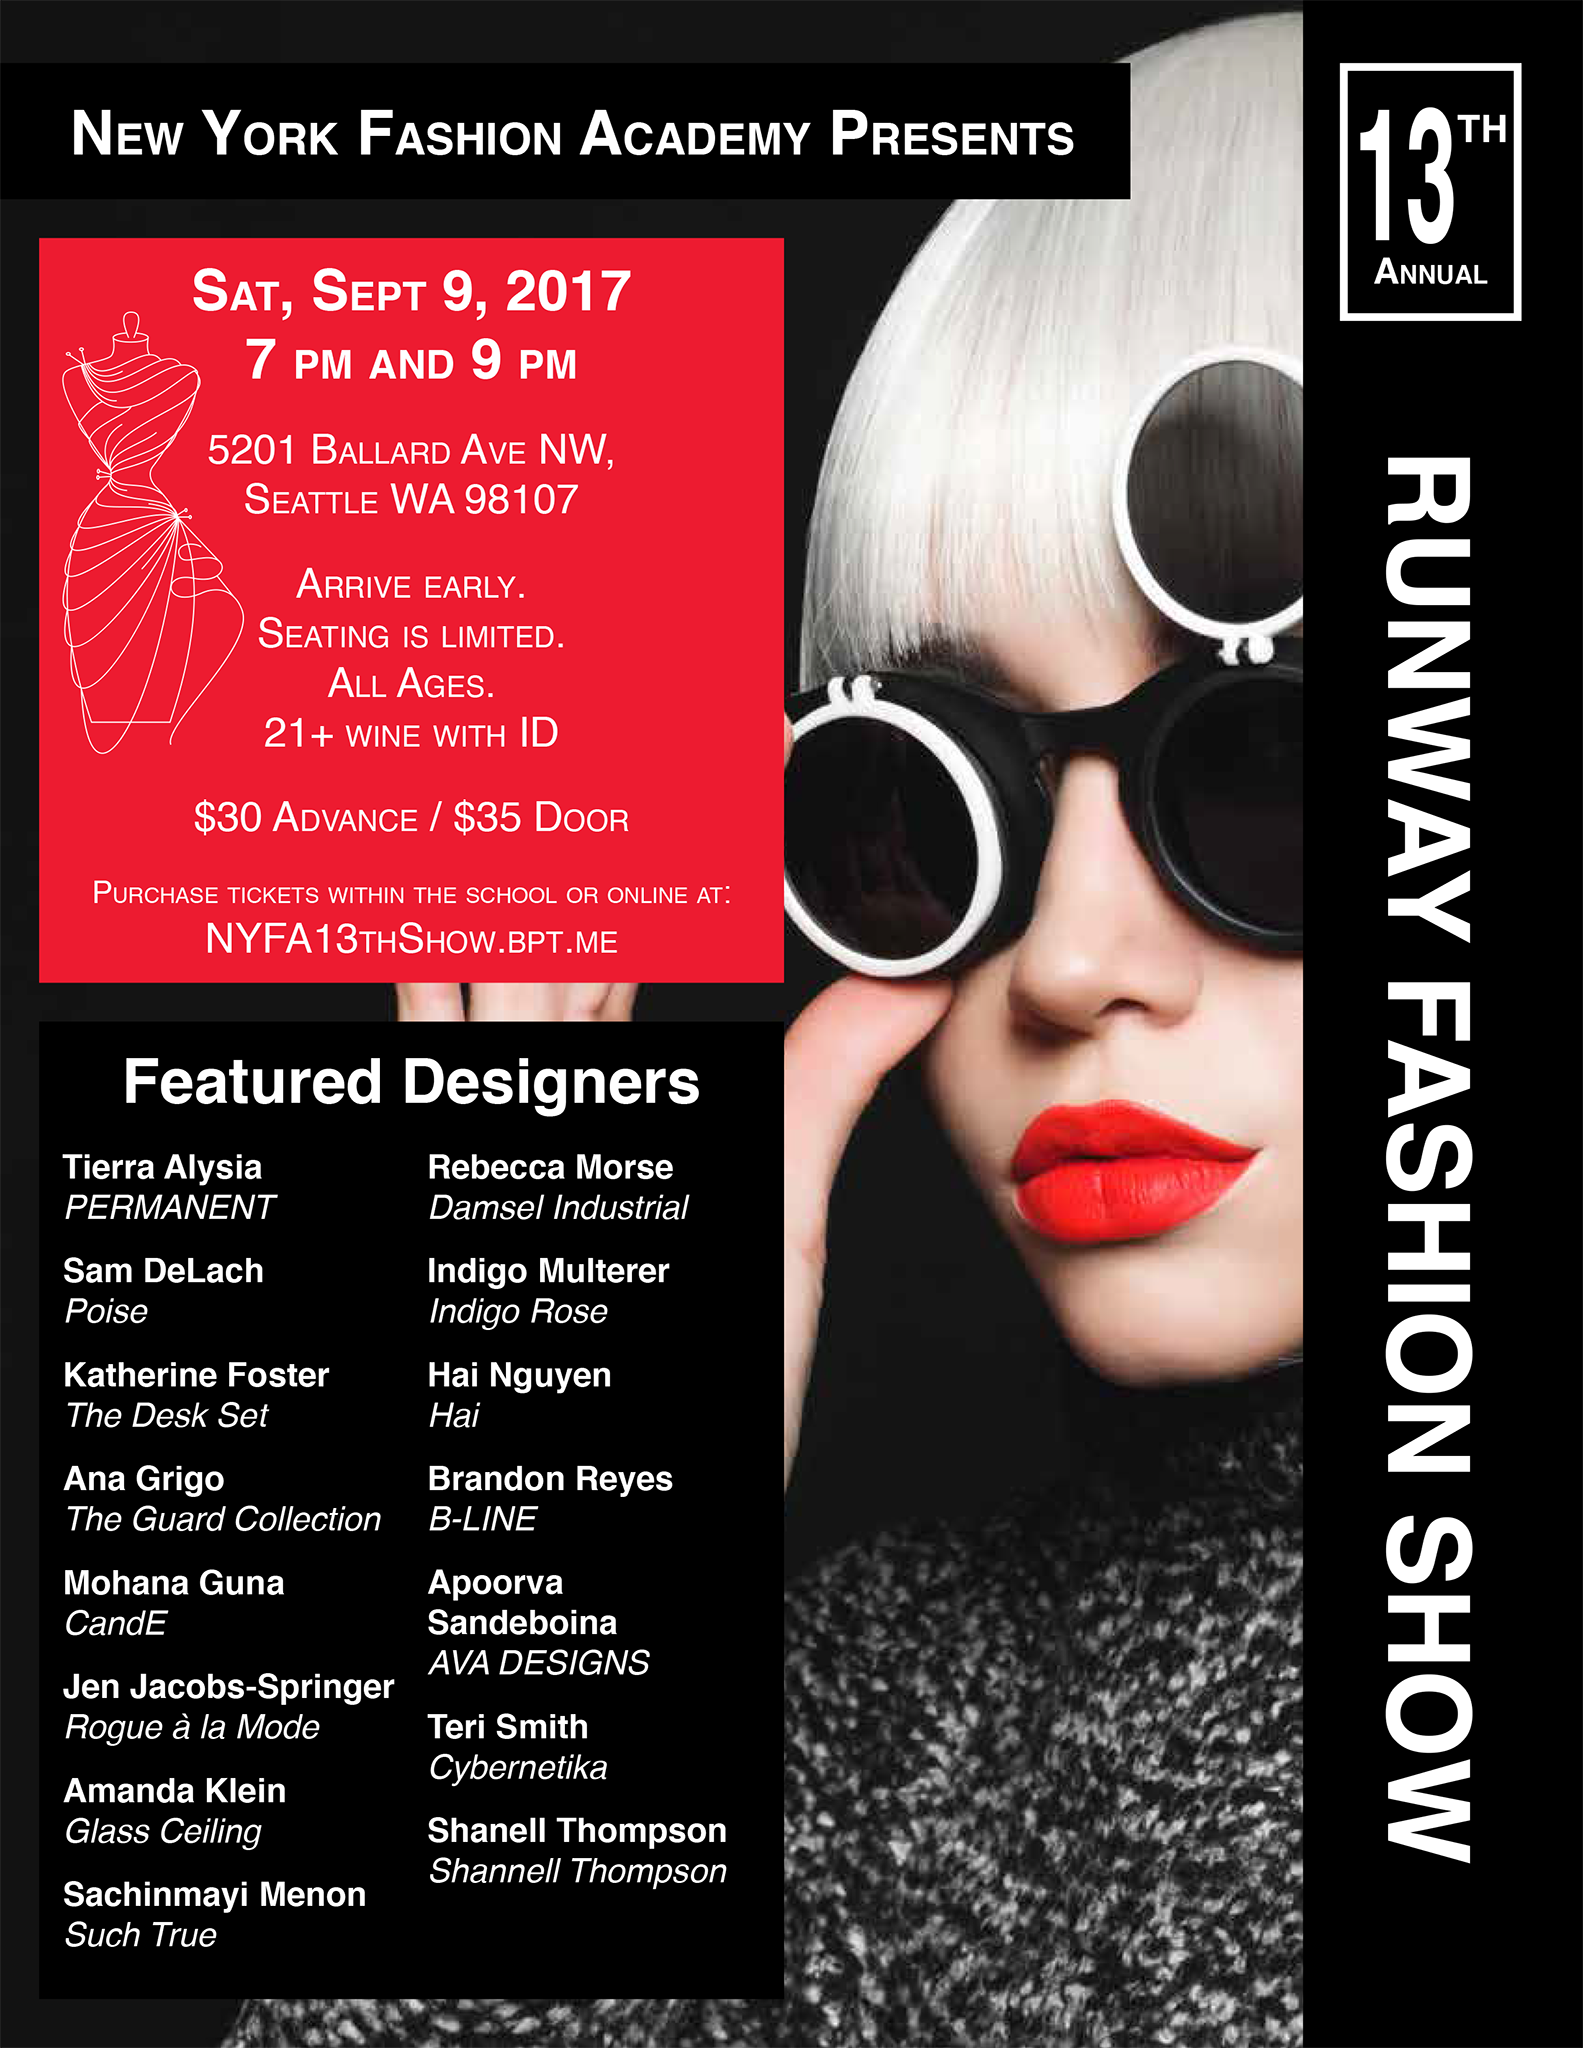 Poster advertising New York Fashion Academy's 13th Annual Runway Show. Designed by Jennifer Jacobs-Springer